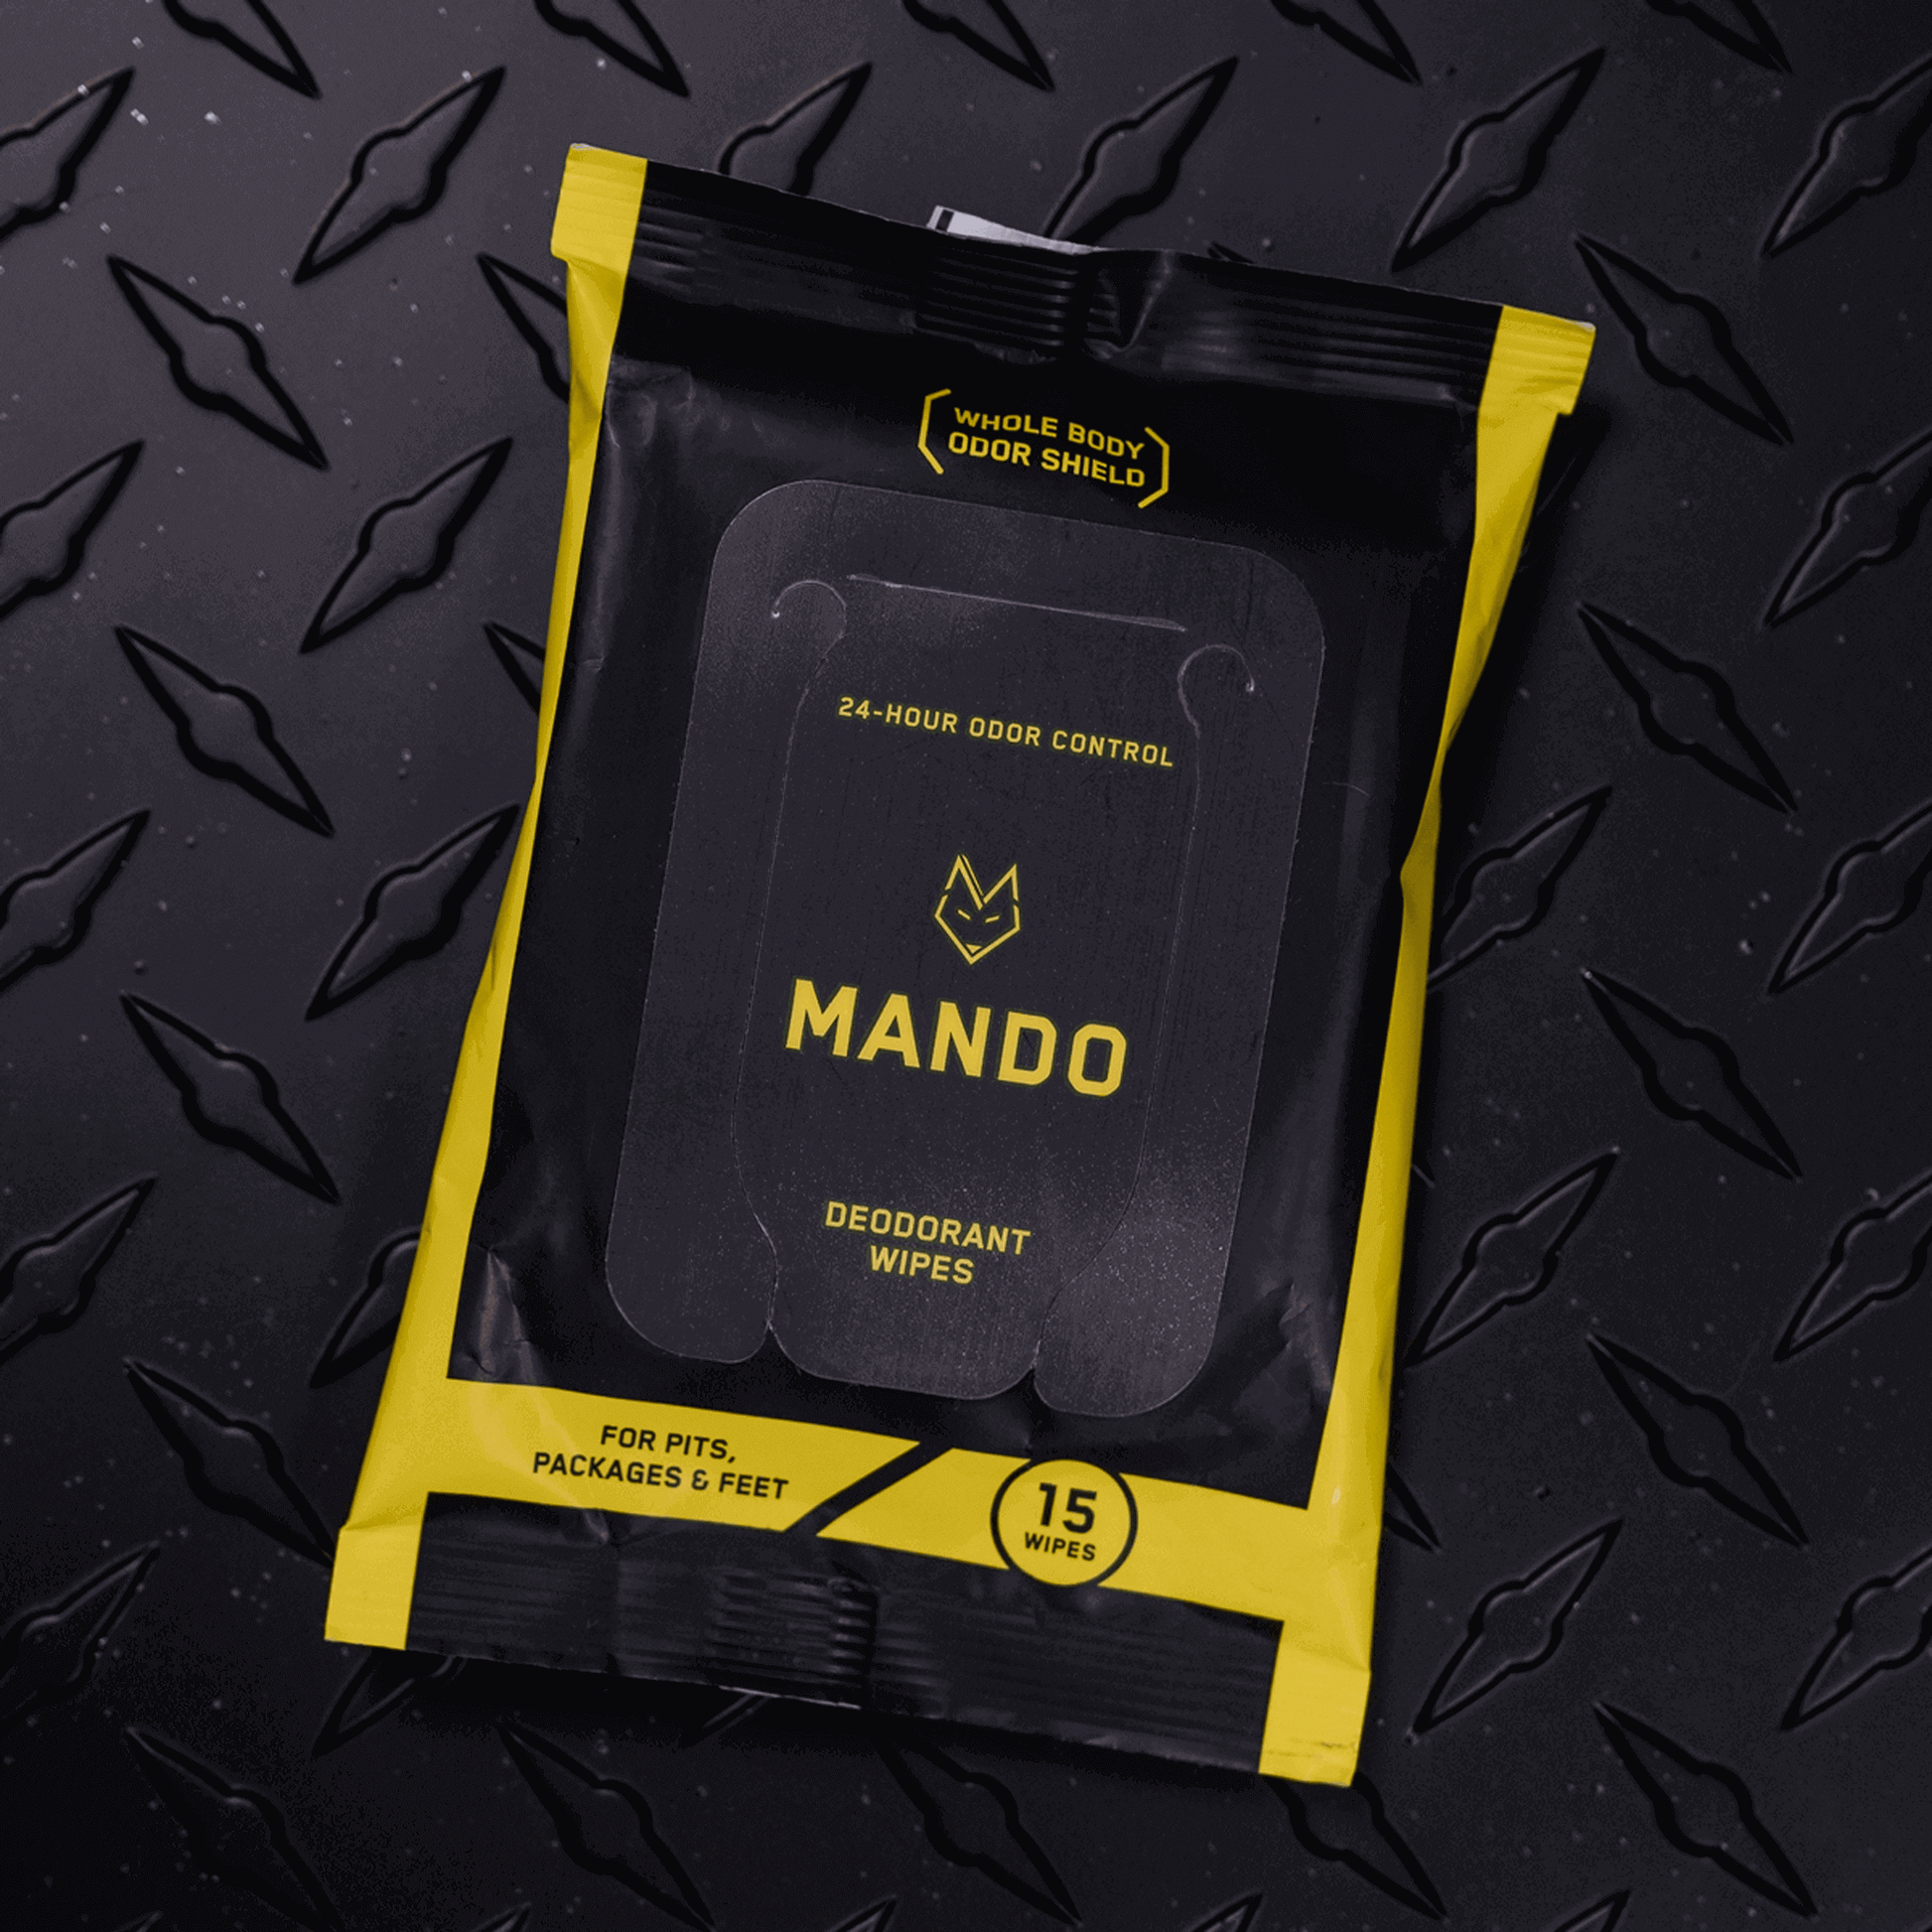 yellow and black colored pack of Mando 15 count deodorant wipes against black background